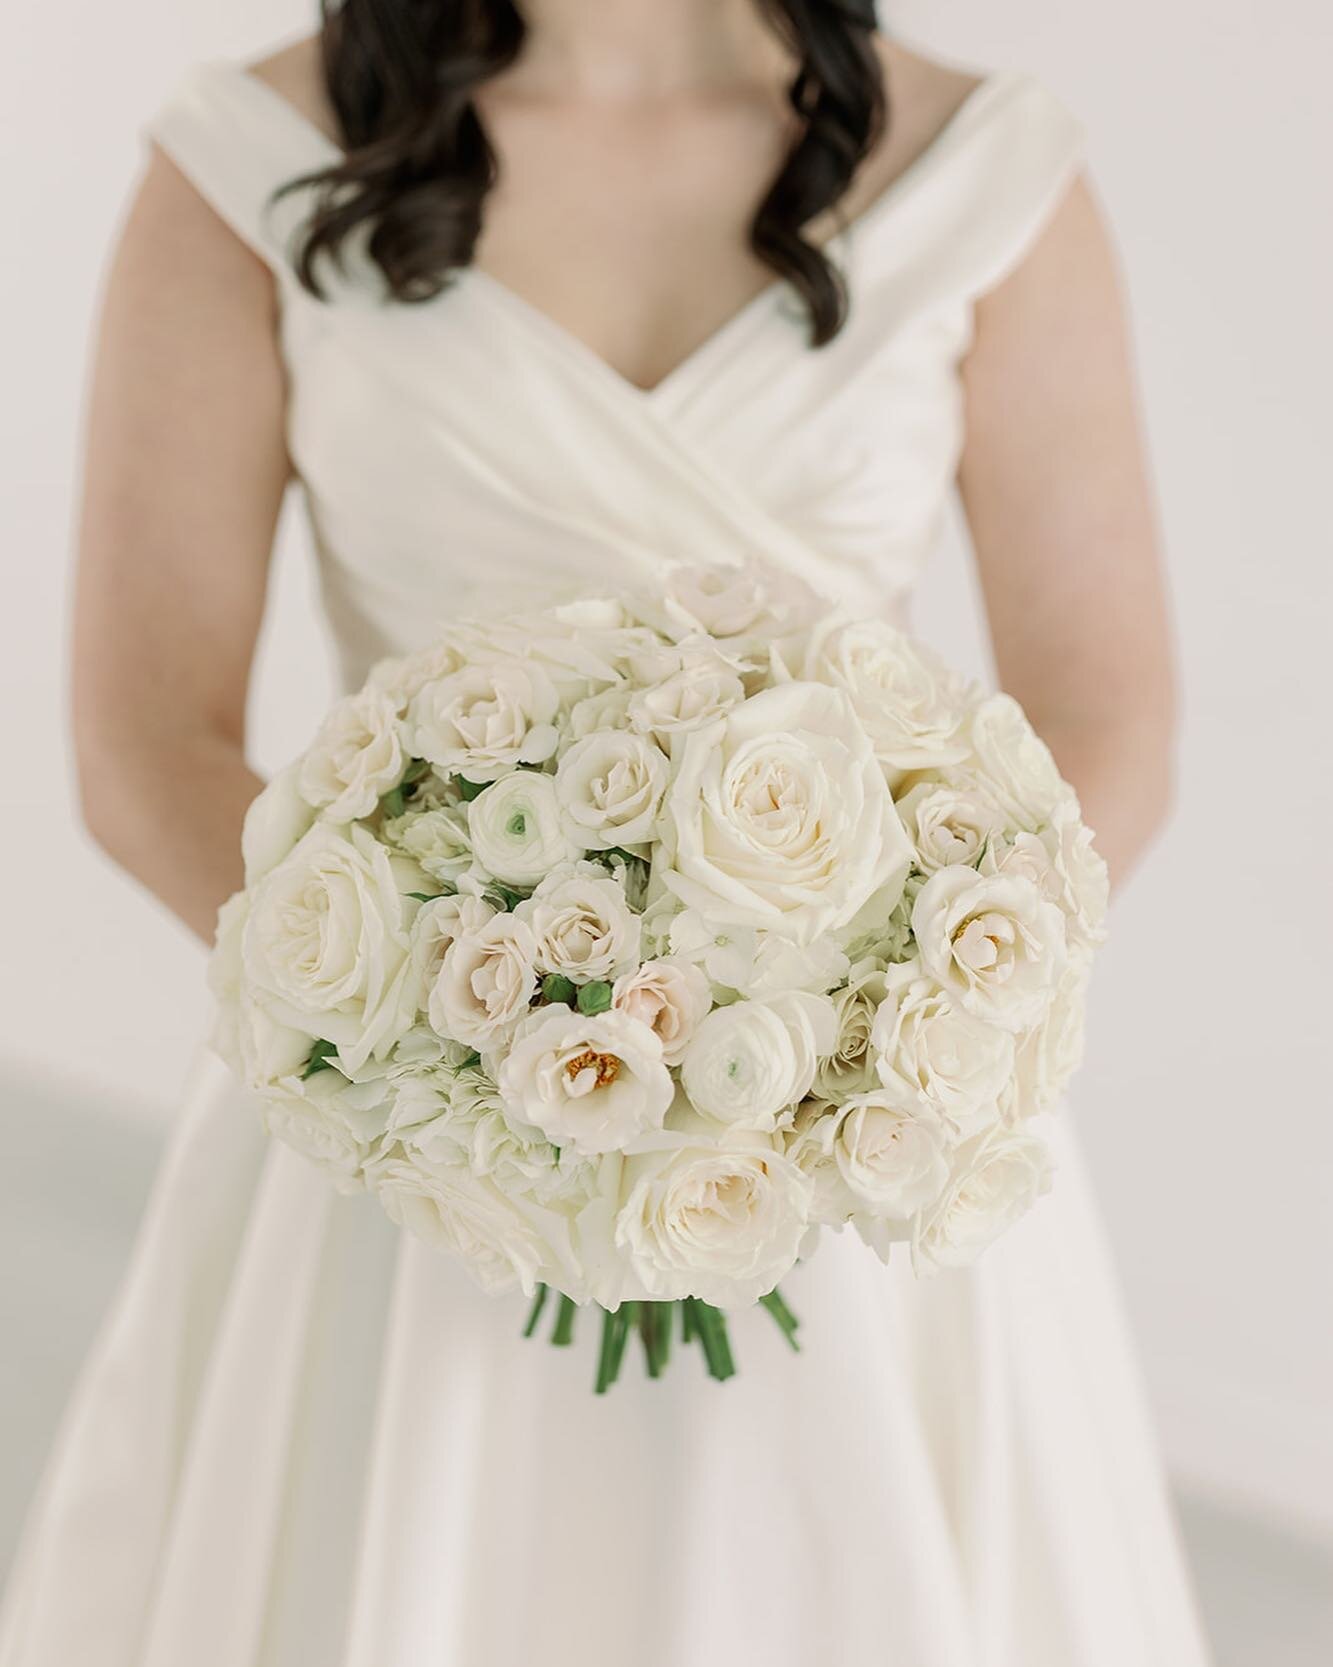 You can never go wrong with a clean, classic bouquet. 

Captured beautifully by @kortney.boyett